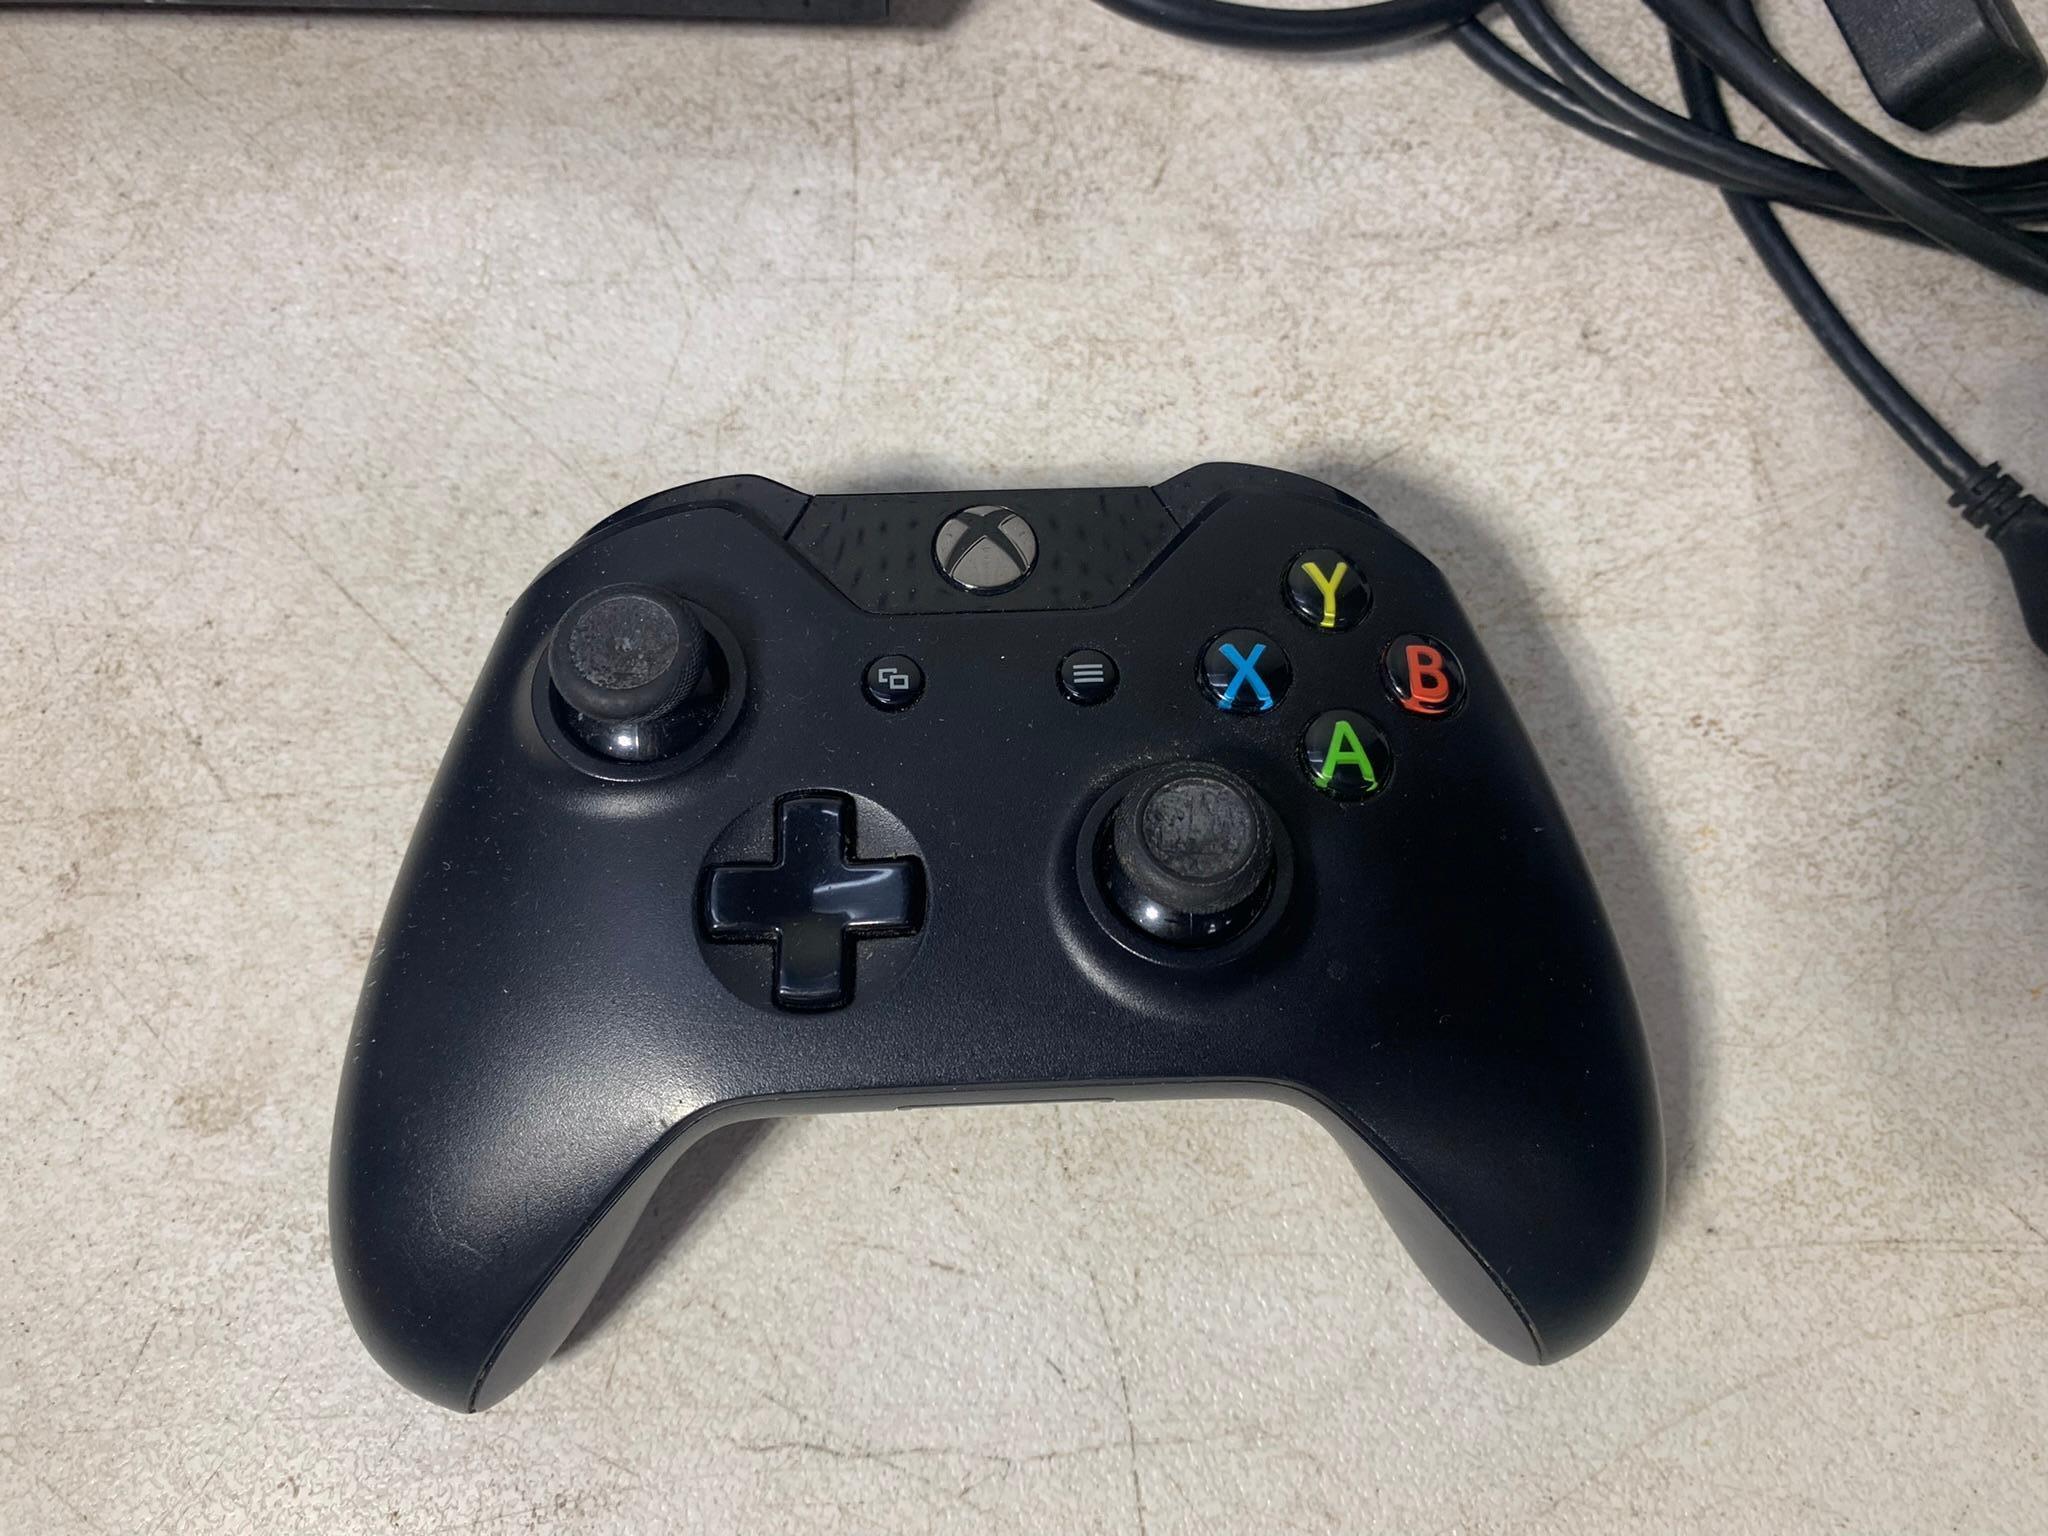 Microsoft XBOX ONE Console with Controller and Cords